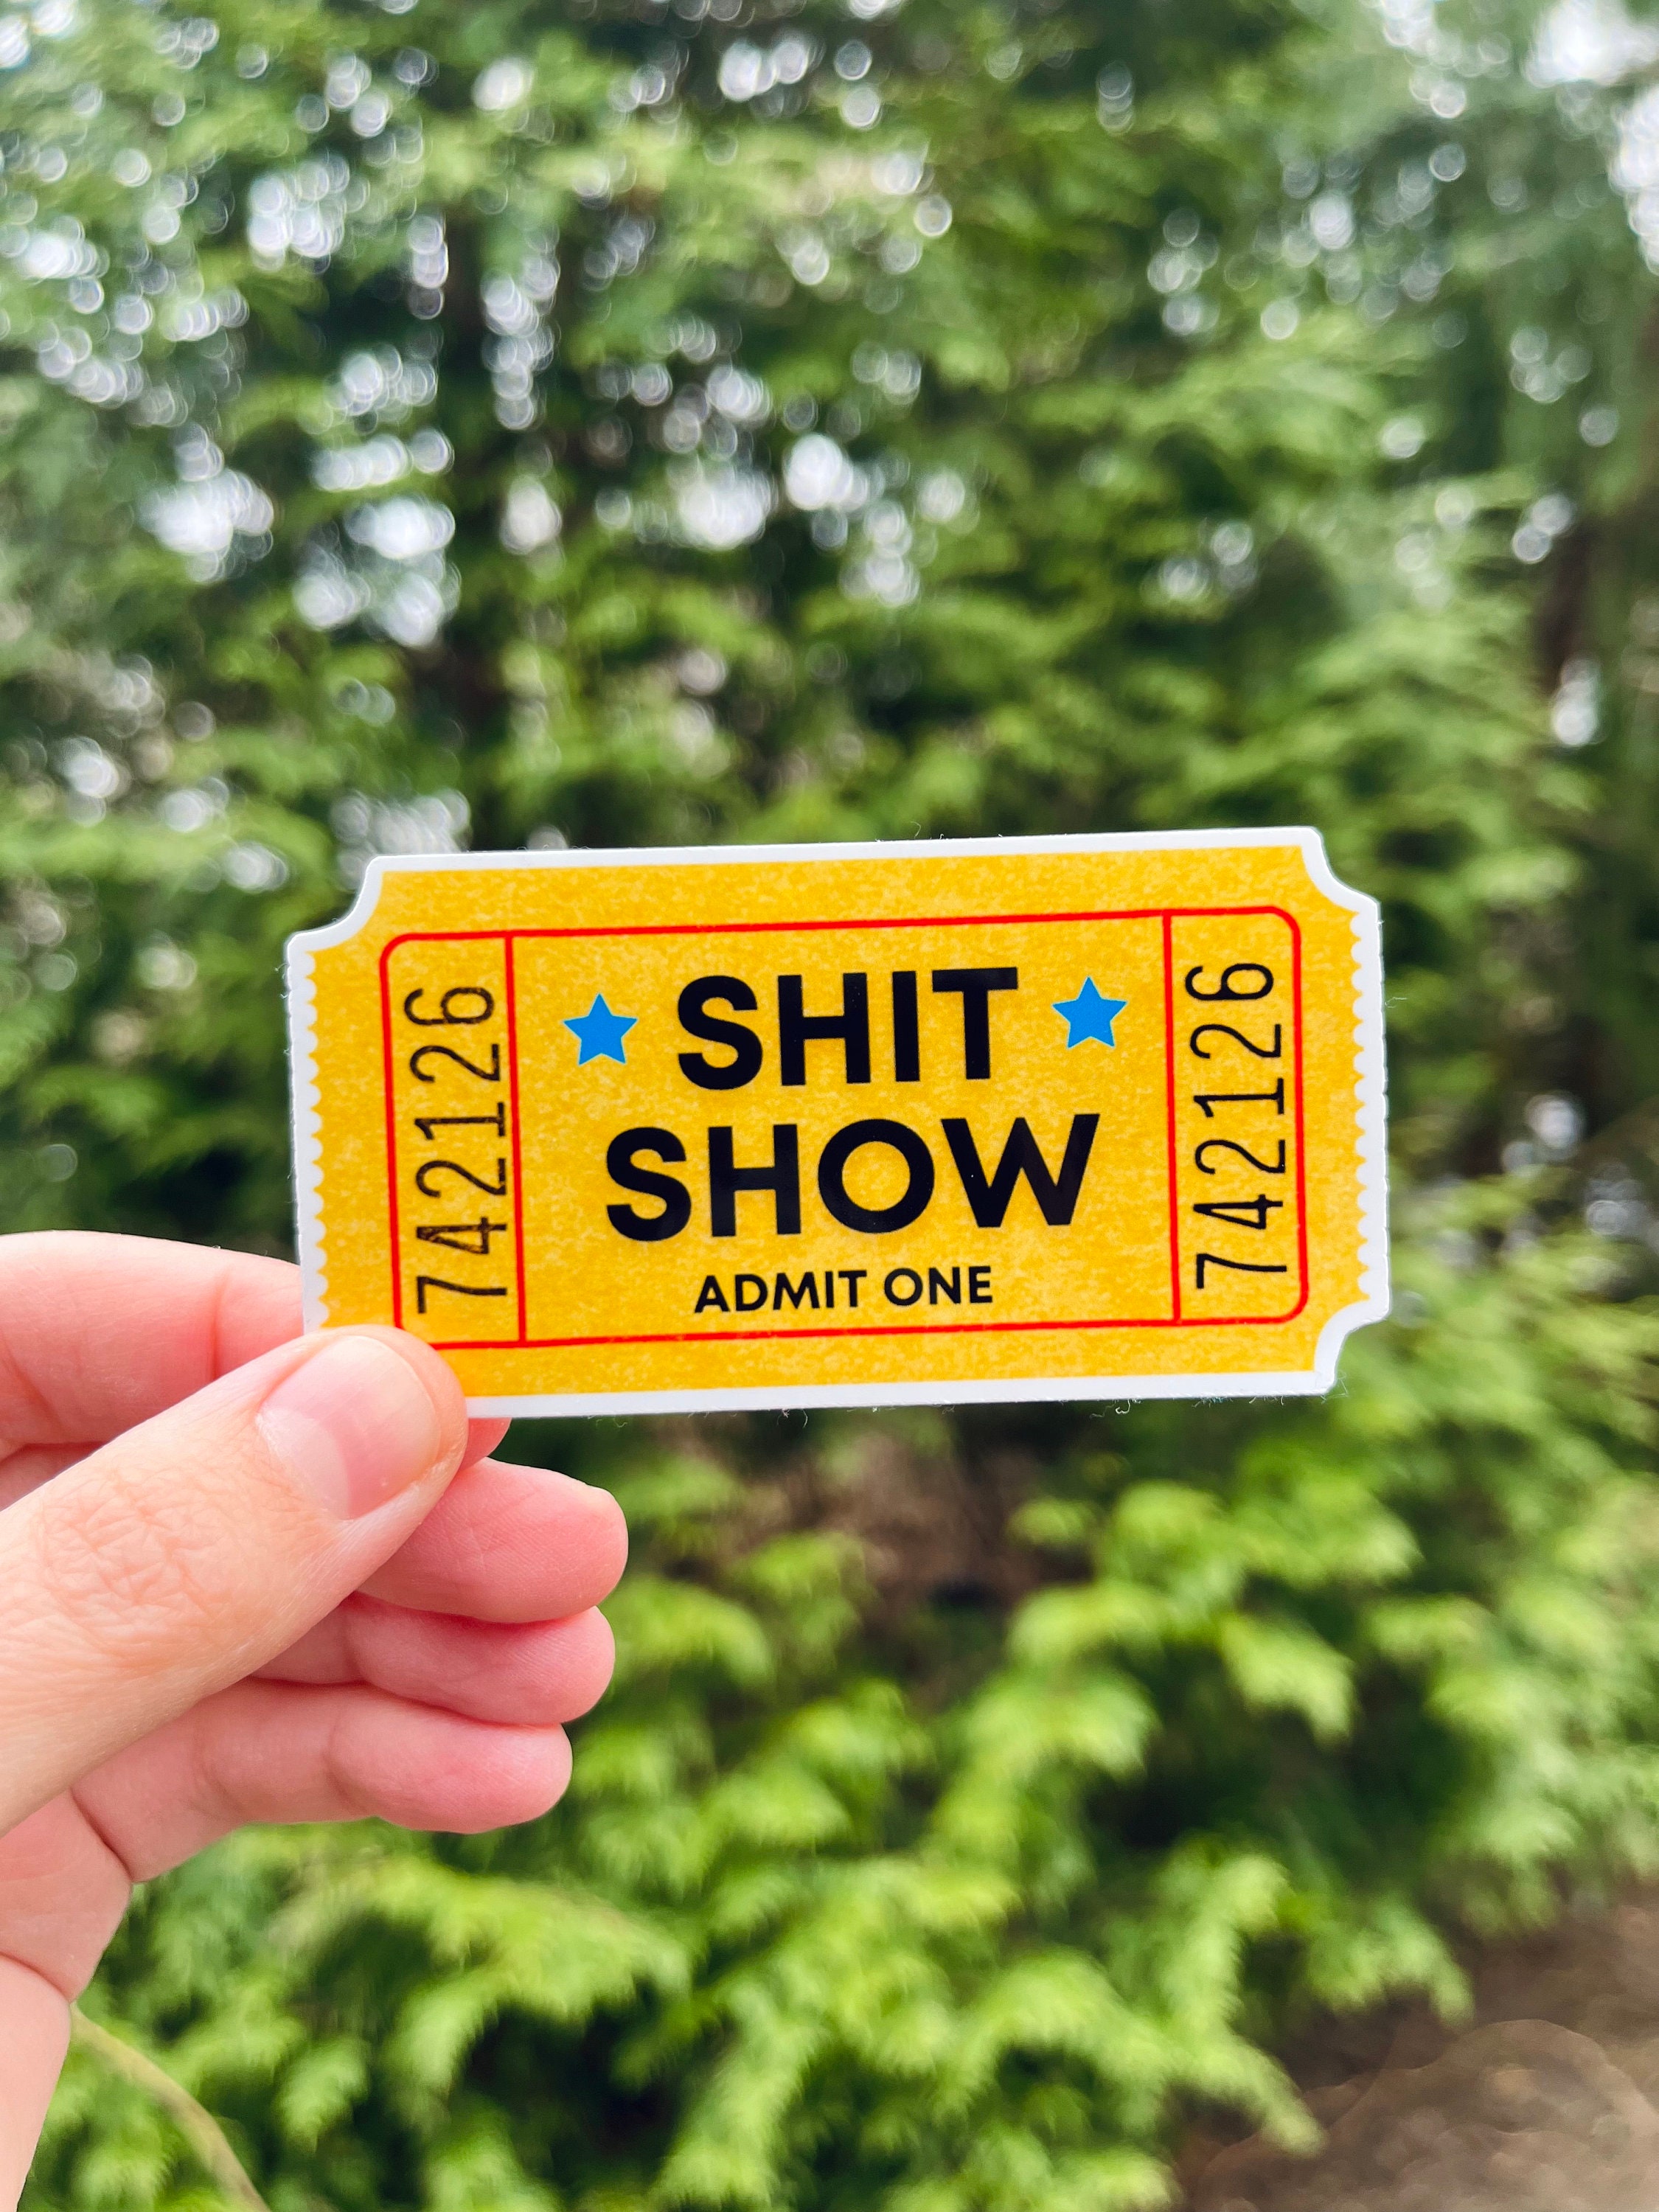 Shit Show Ticket Vinyl Sticker / Magnet for Water Bottle, Laptop, Car Funny  Gift Im a Mess Admit One Movie Ticket Swear Humor 